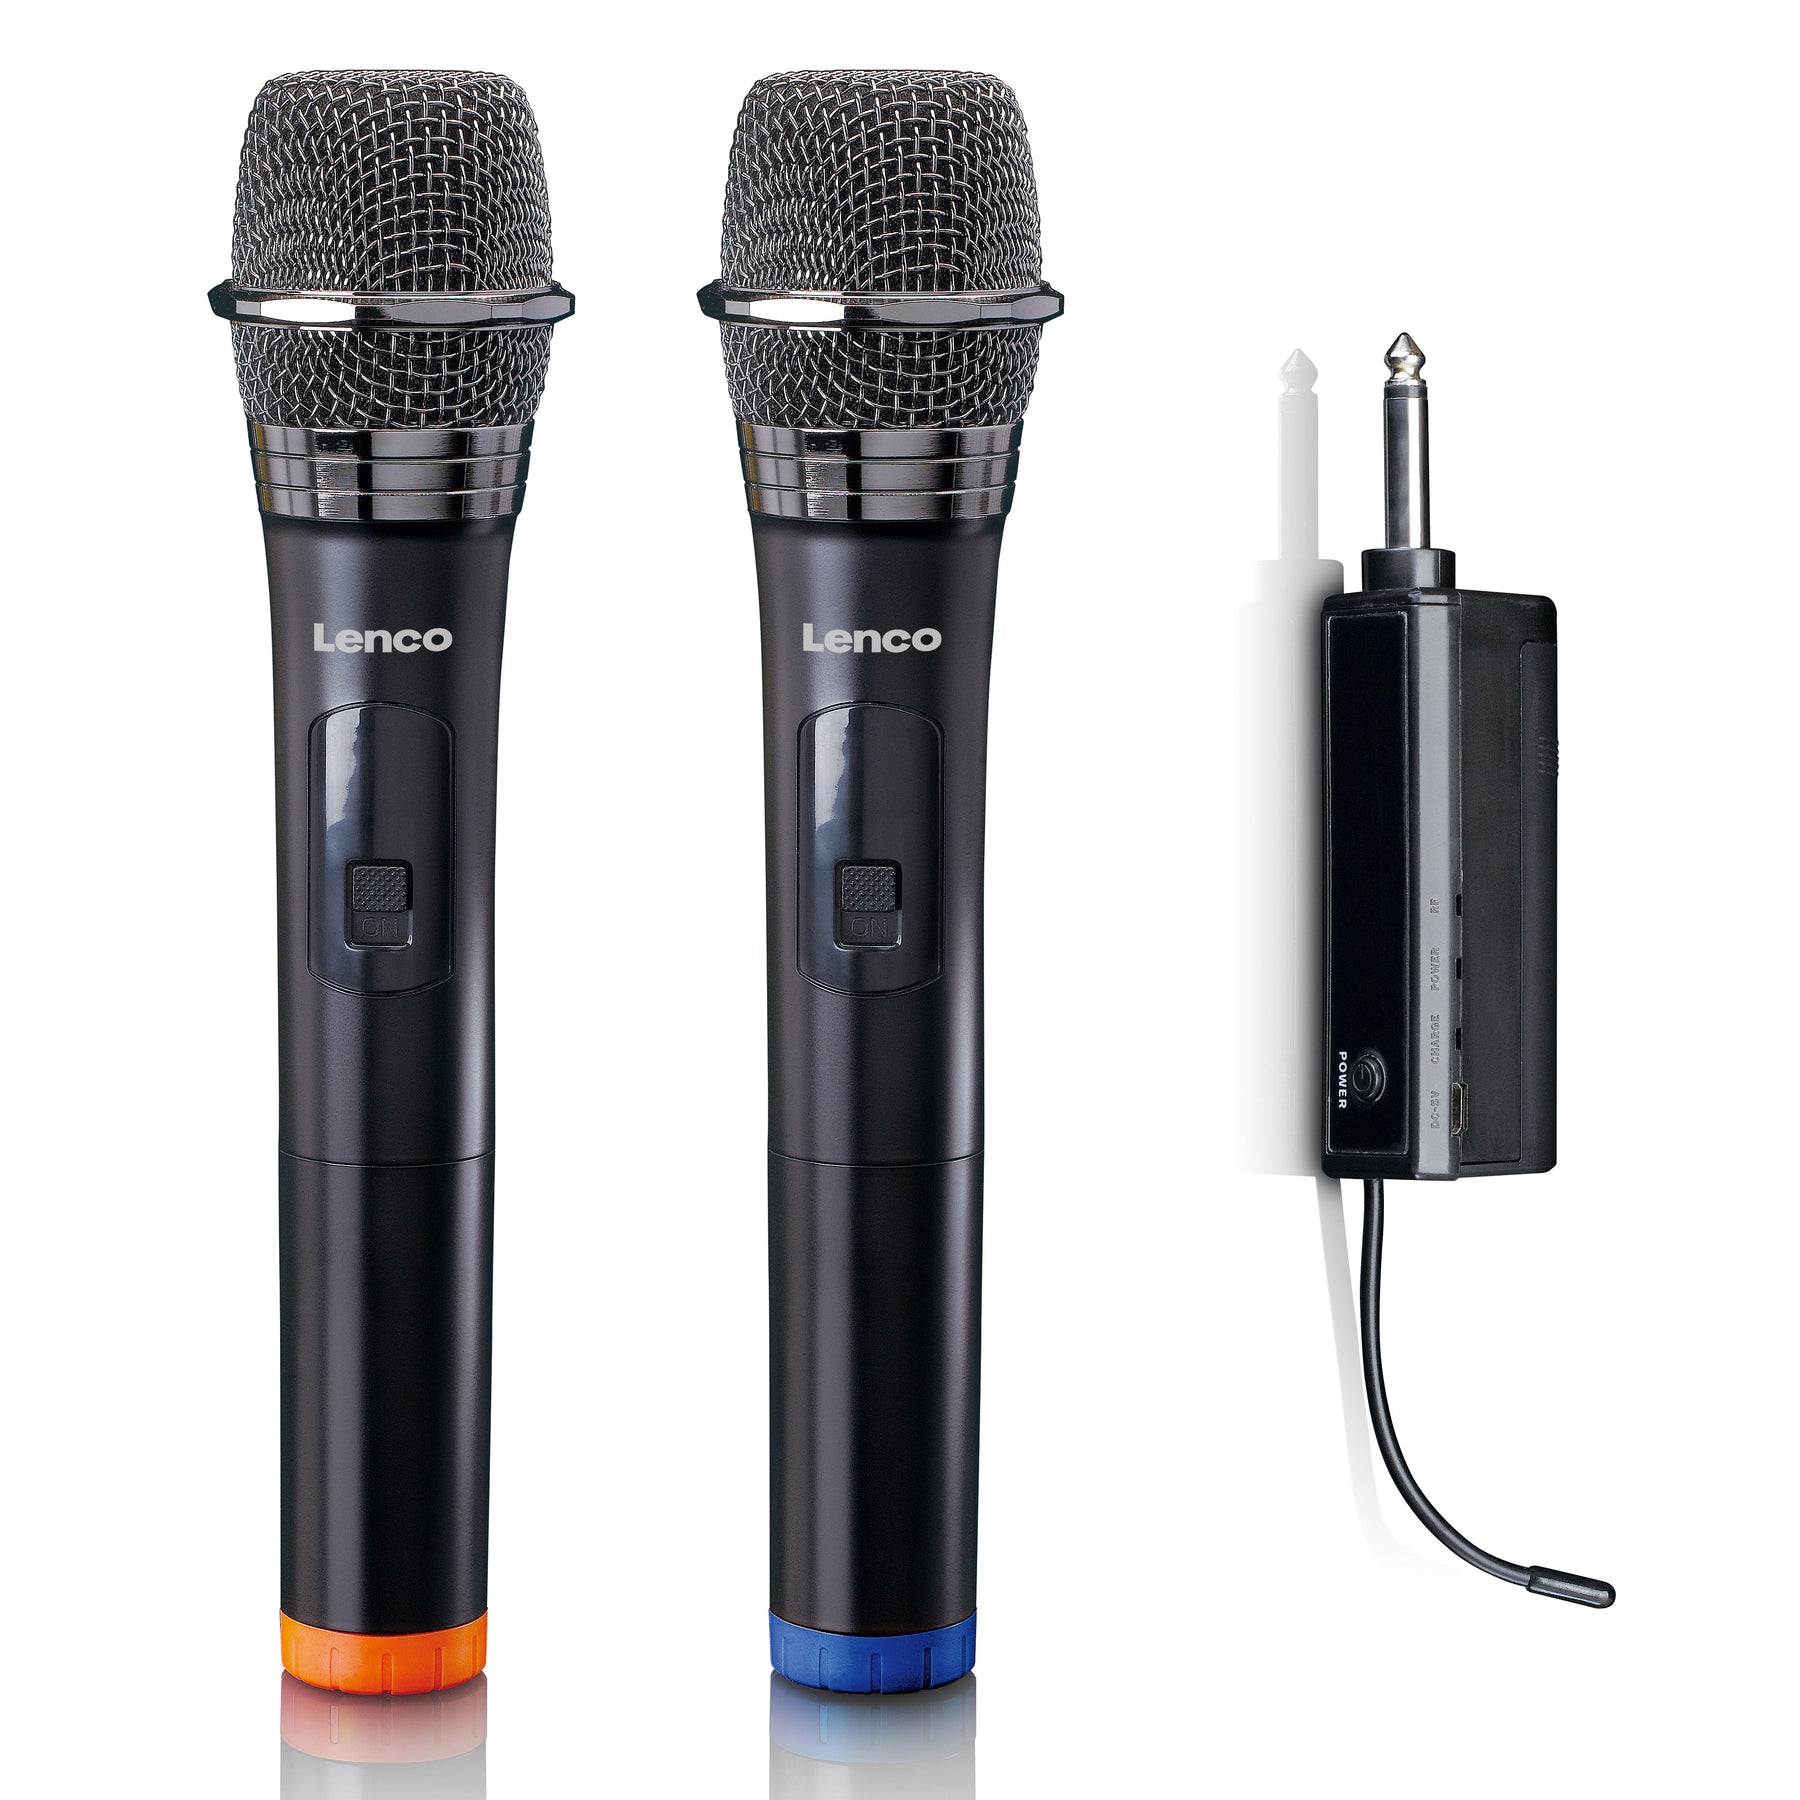 LENCO - 2 receiver powered with MCW-020BK battery Set portable - of microphones wireless